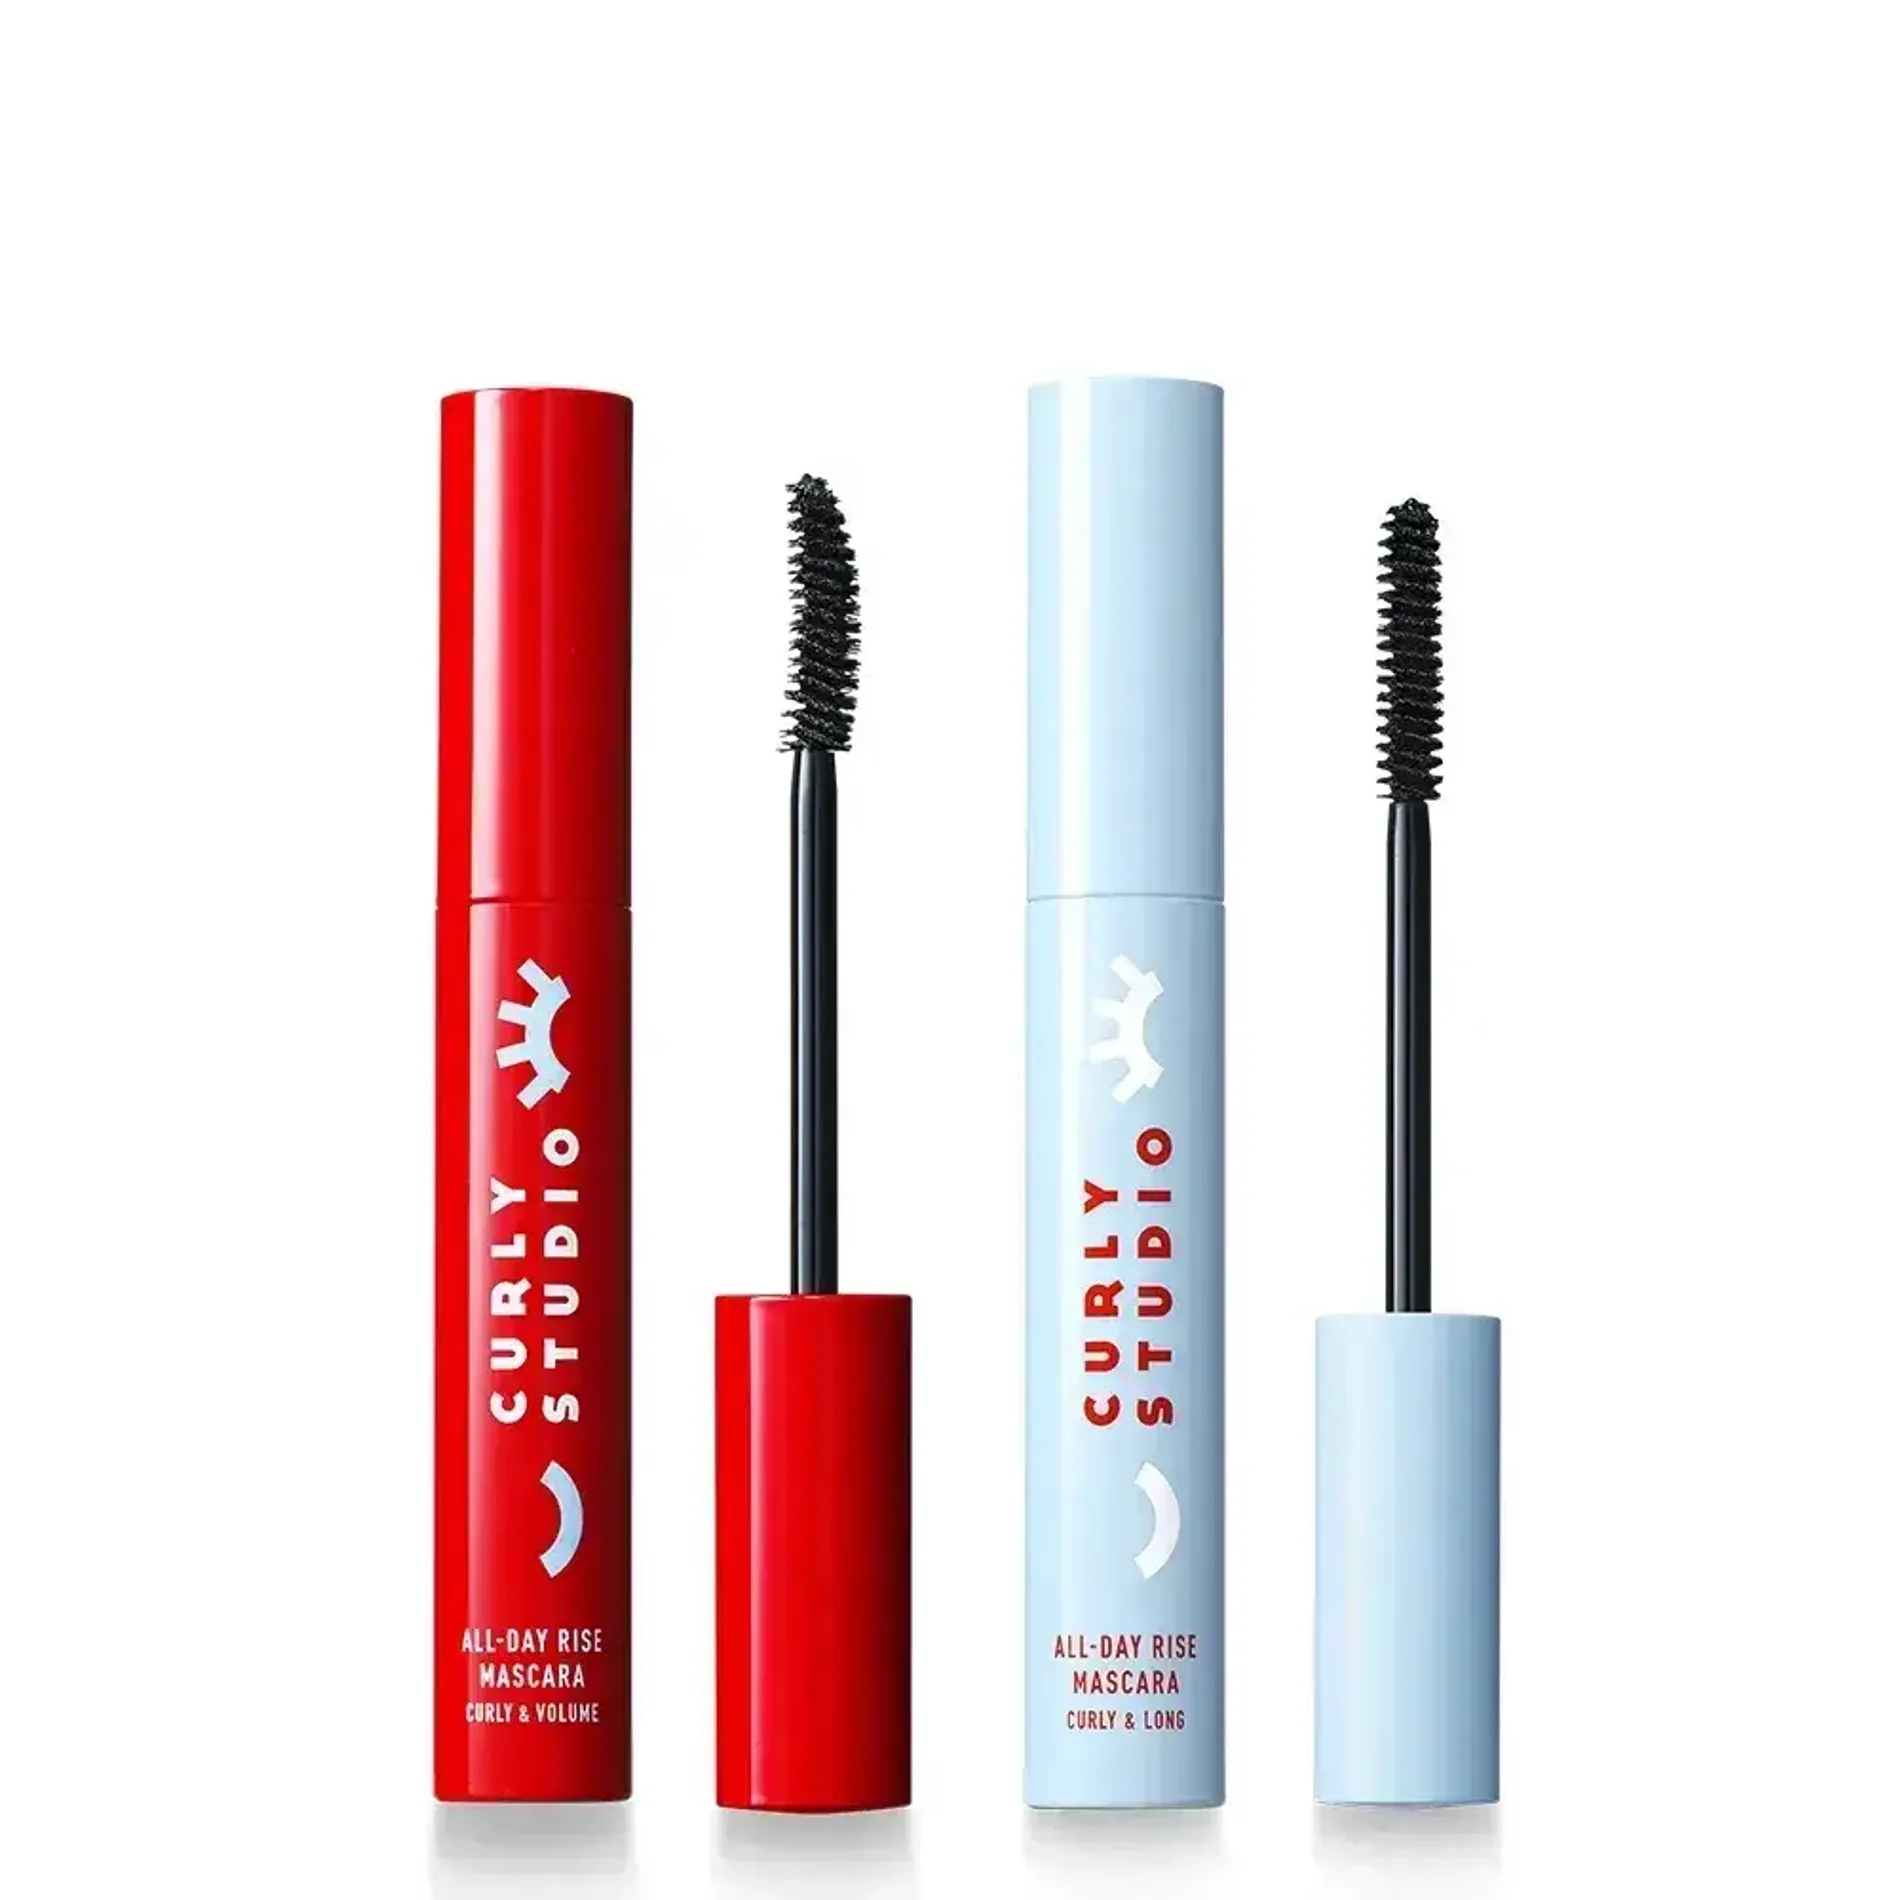 mascara-lam-cong-day-mi-curly-studio-all-day-rise-mascara-01-curly-volume-8g-6